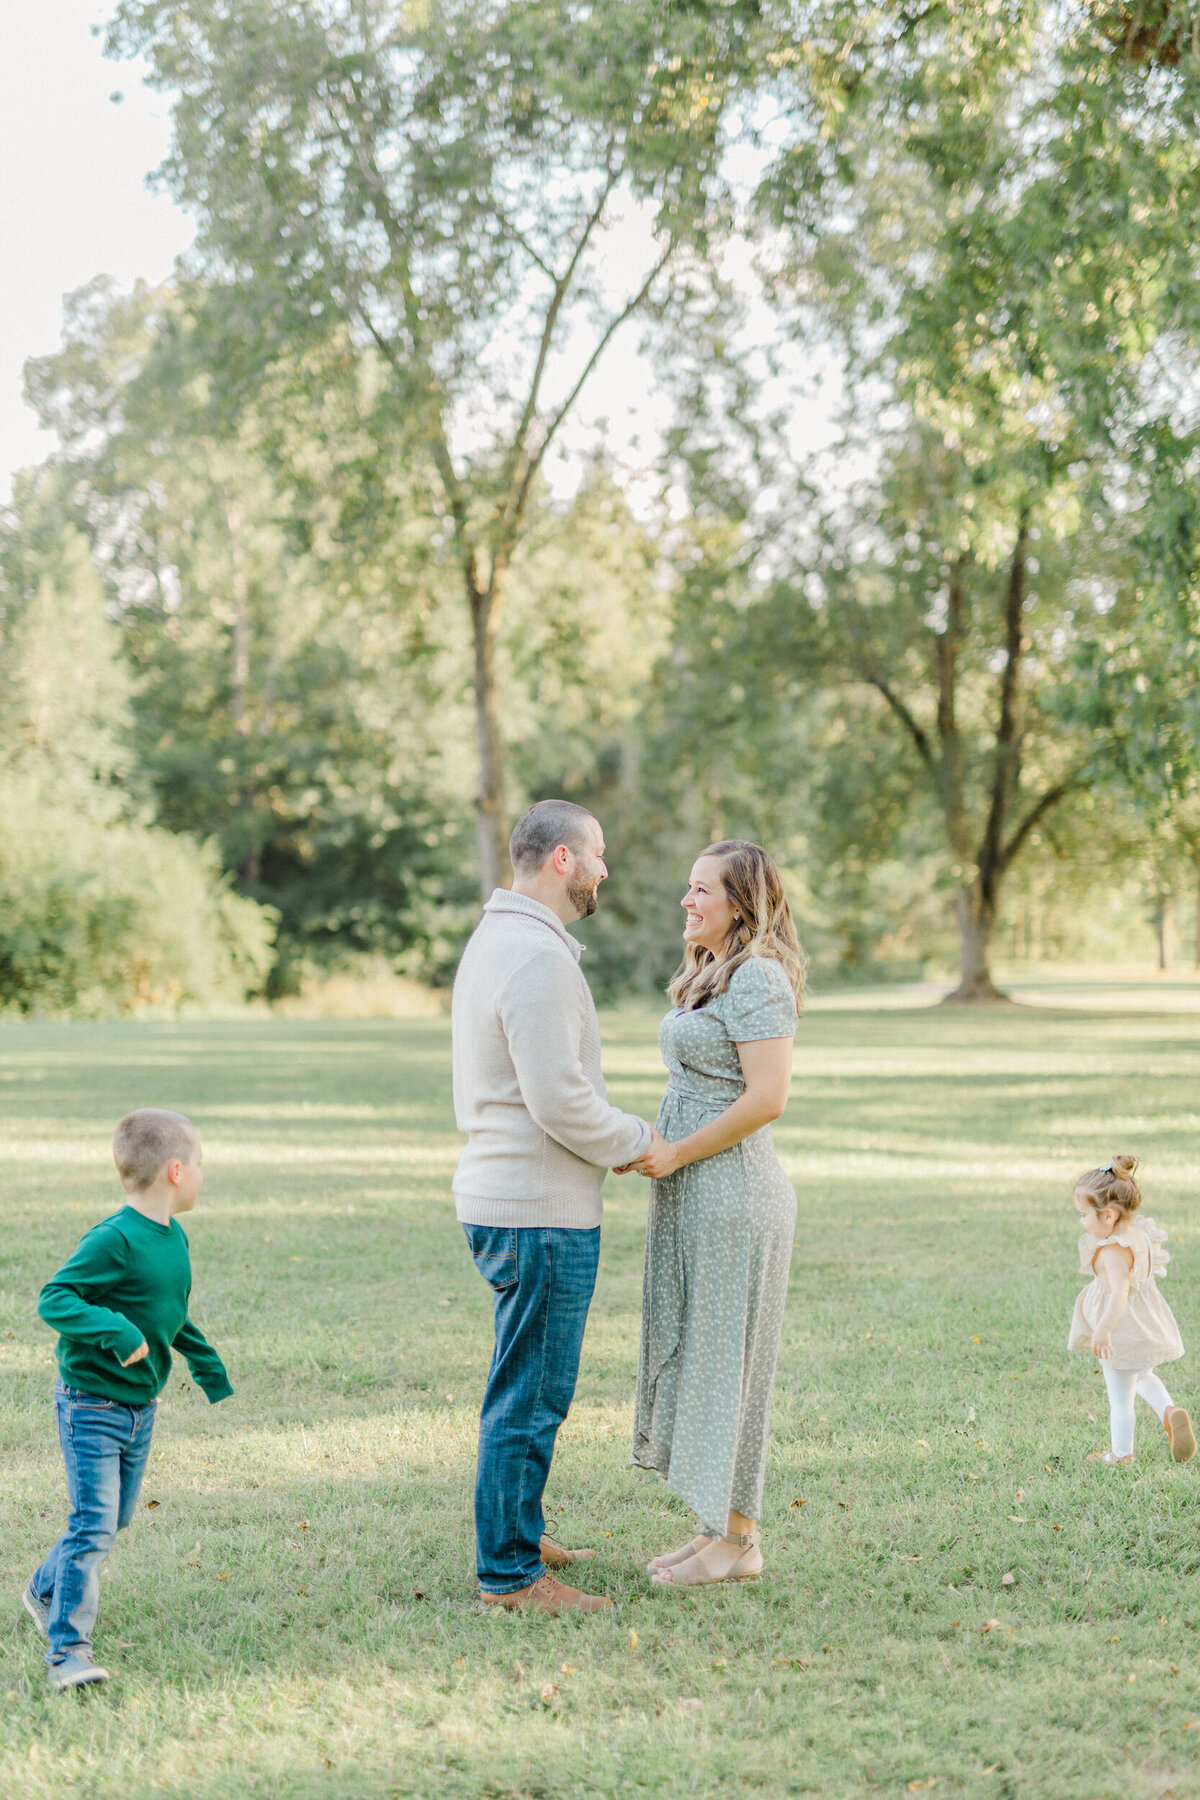 North-Raleigh-Family-Photographer-Danielle-Pressley54